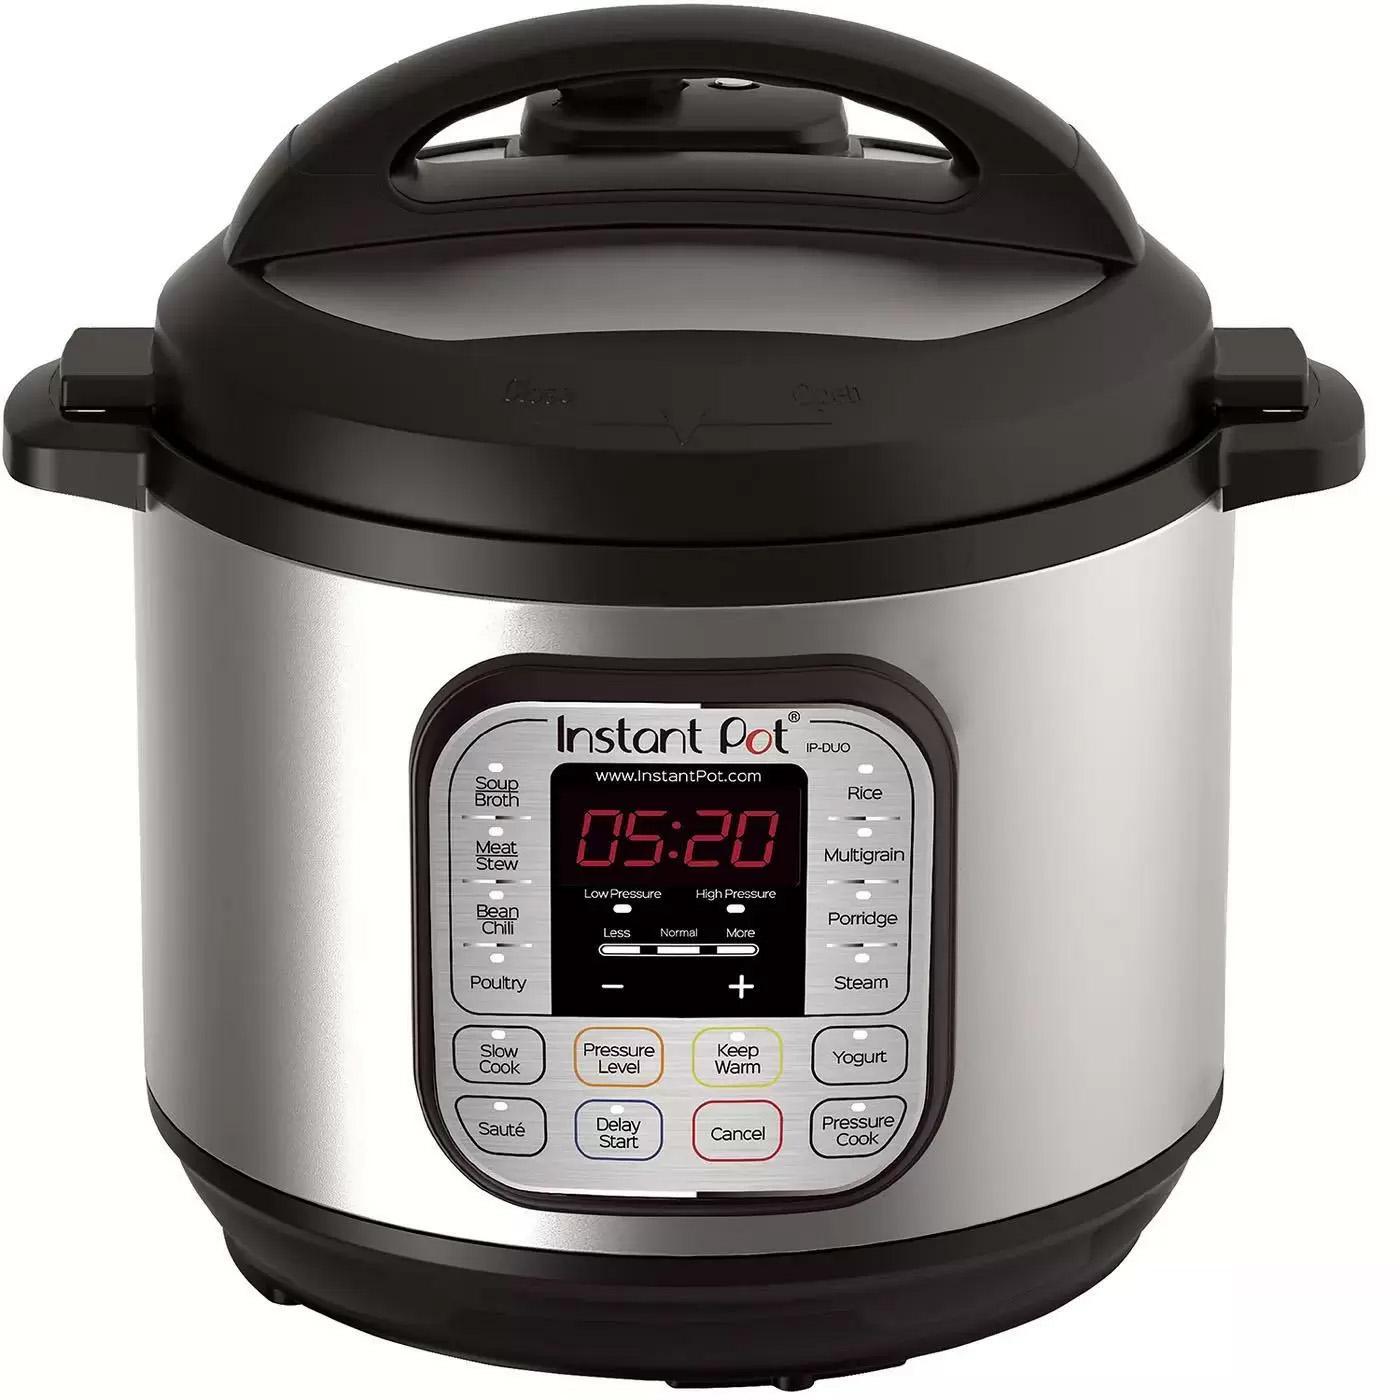 Instant Pot Duo 7-In-1 6-Quart Pressure Cooker for $59.99 Shipped